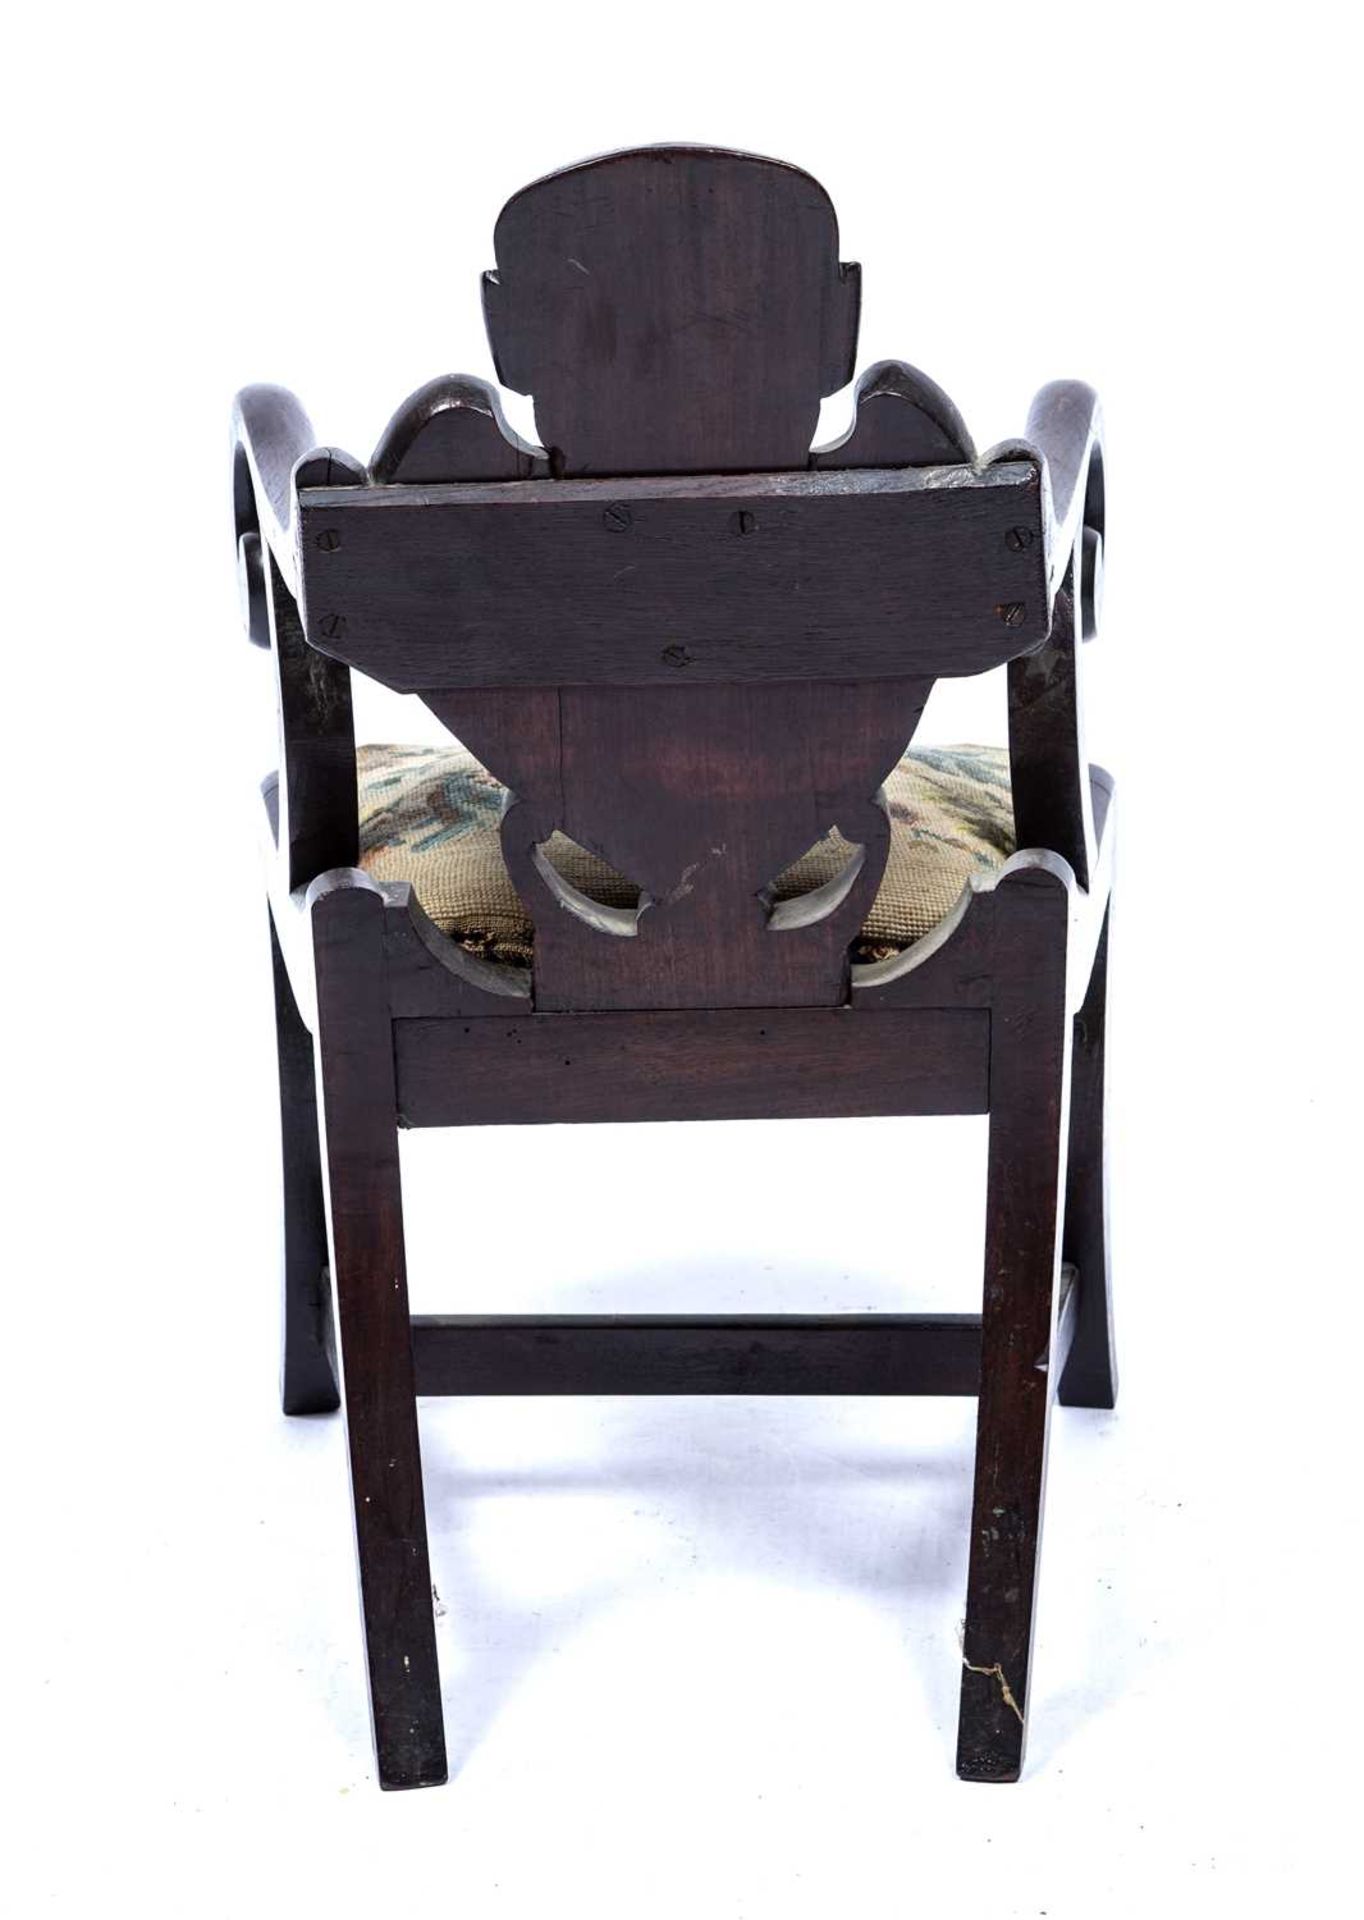 Carved childs chair with a skeleton back on sabre legs with a drop in seat, 64 cm high x 39cm - Image 4 of 4